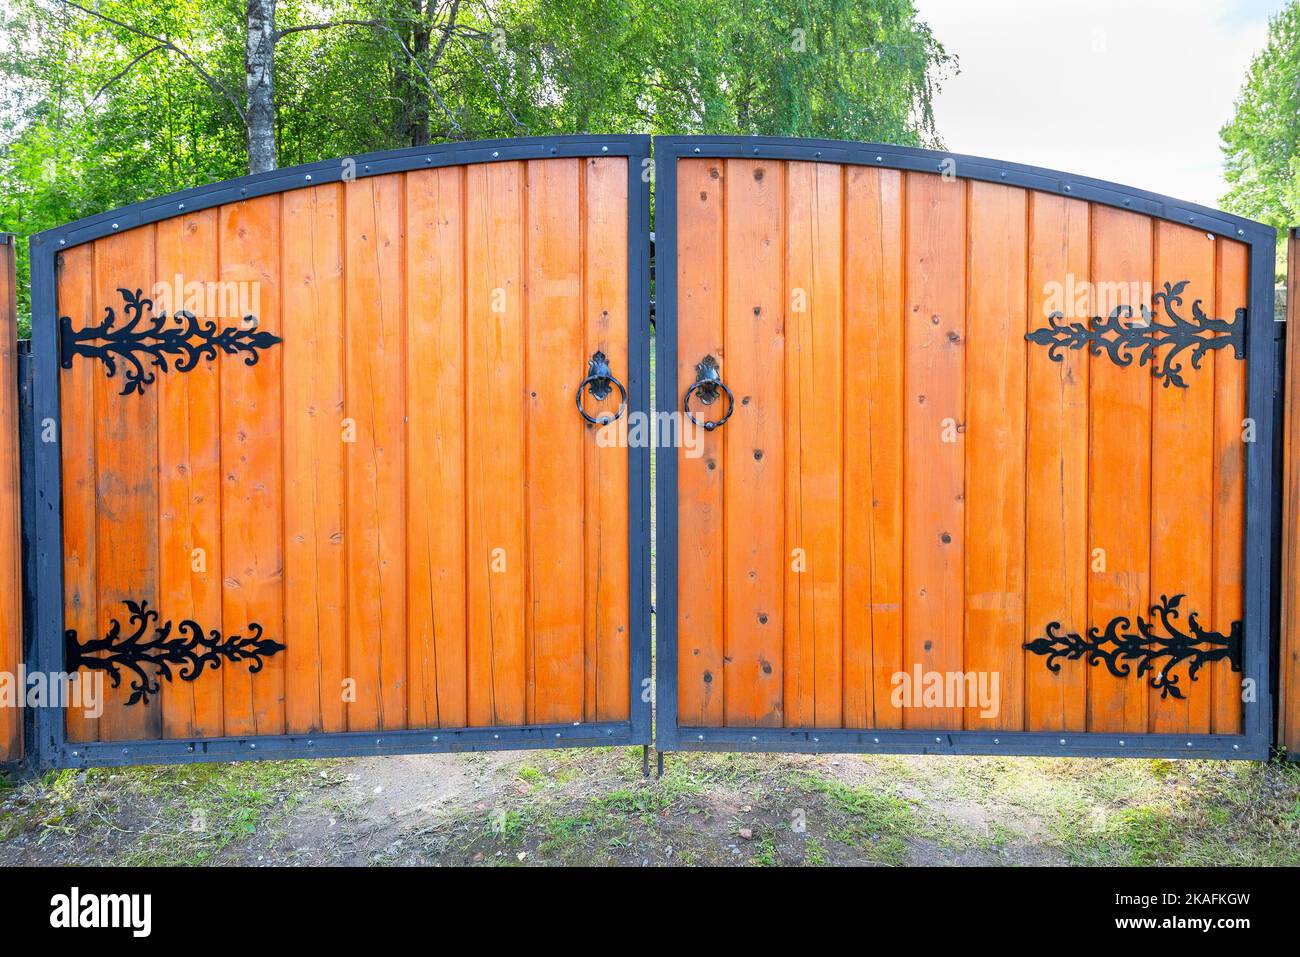 Big new wooden gate with metal knobs and door hinges Stock Photo